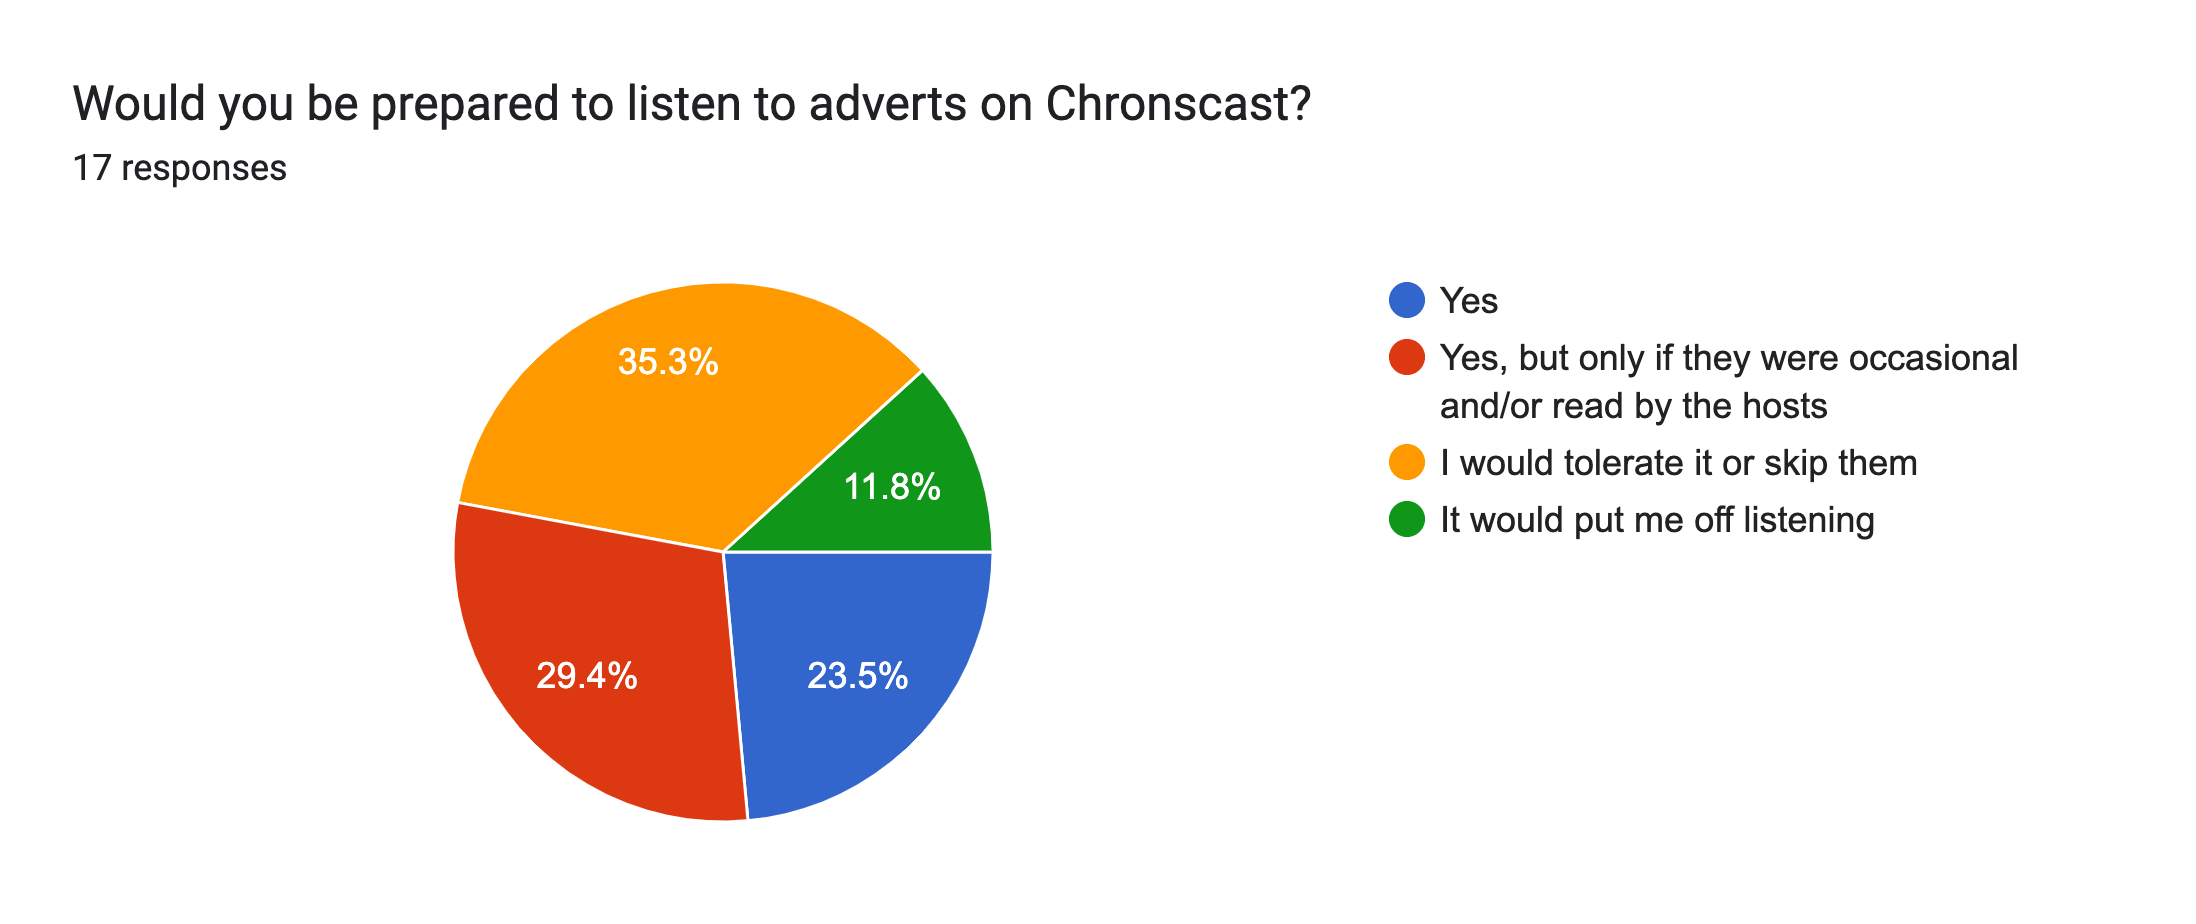 Forms response chart. Question title: Would you be prepared to listen to adverts on Chronscast?. Number of responses: 17 responses.